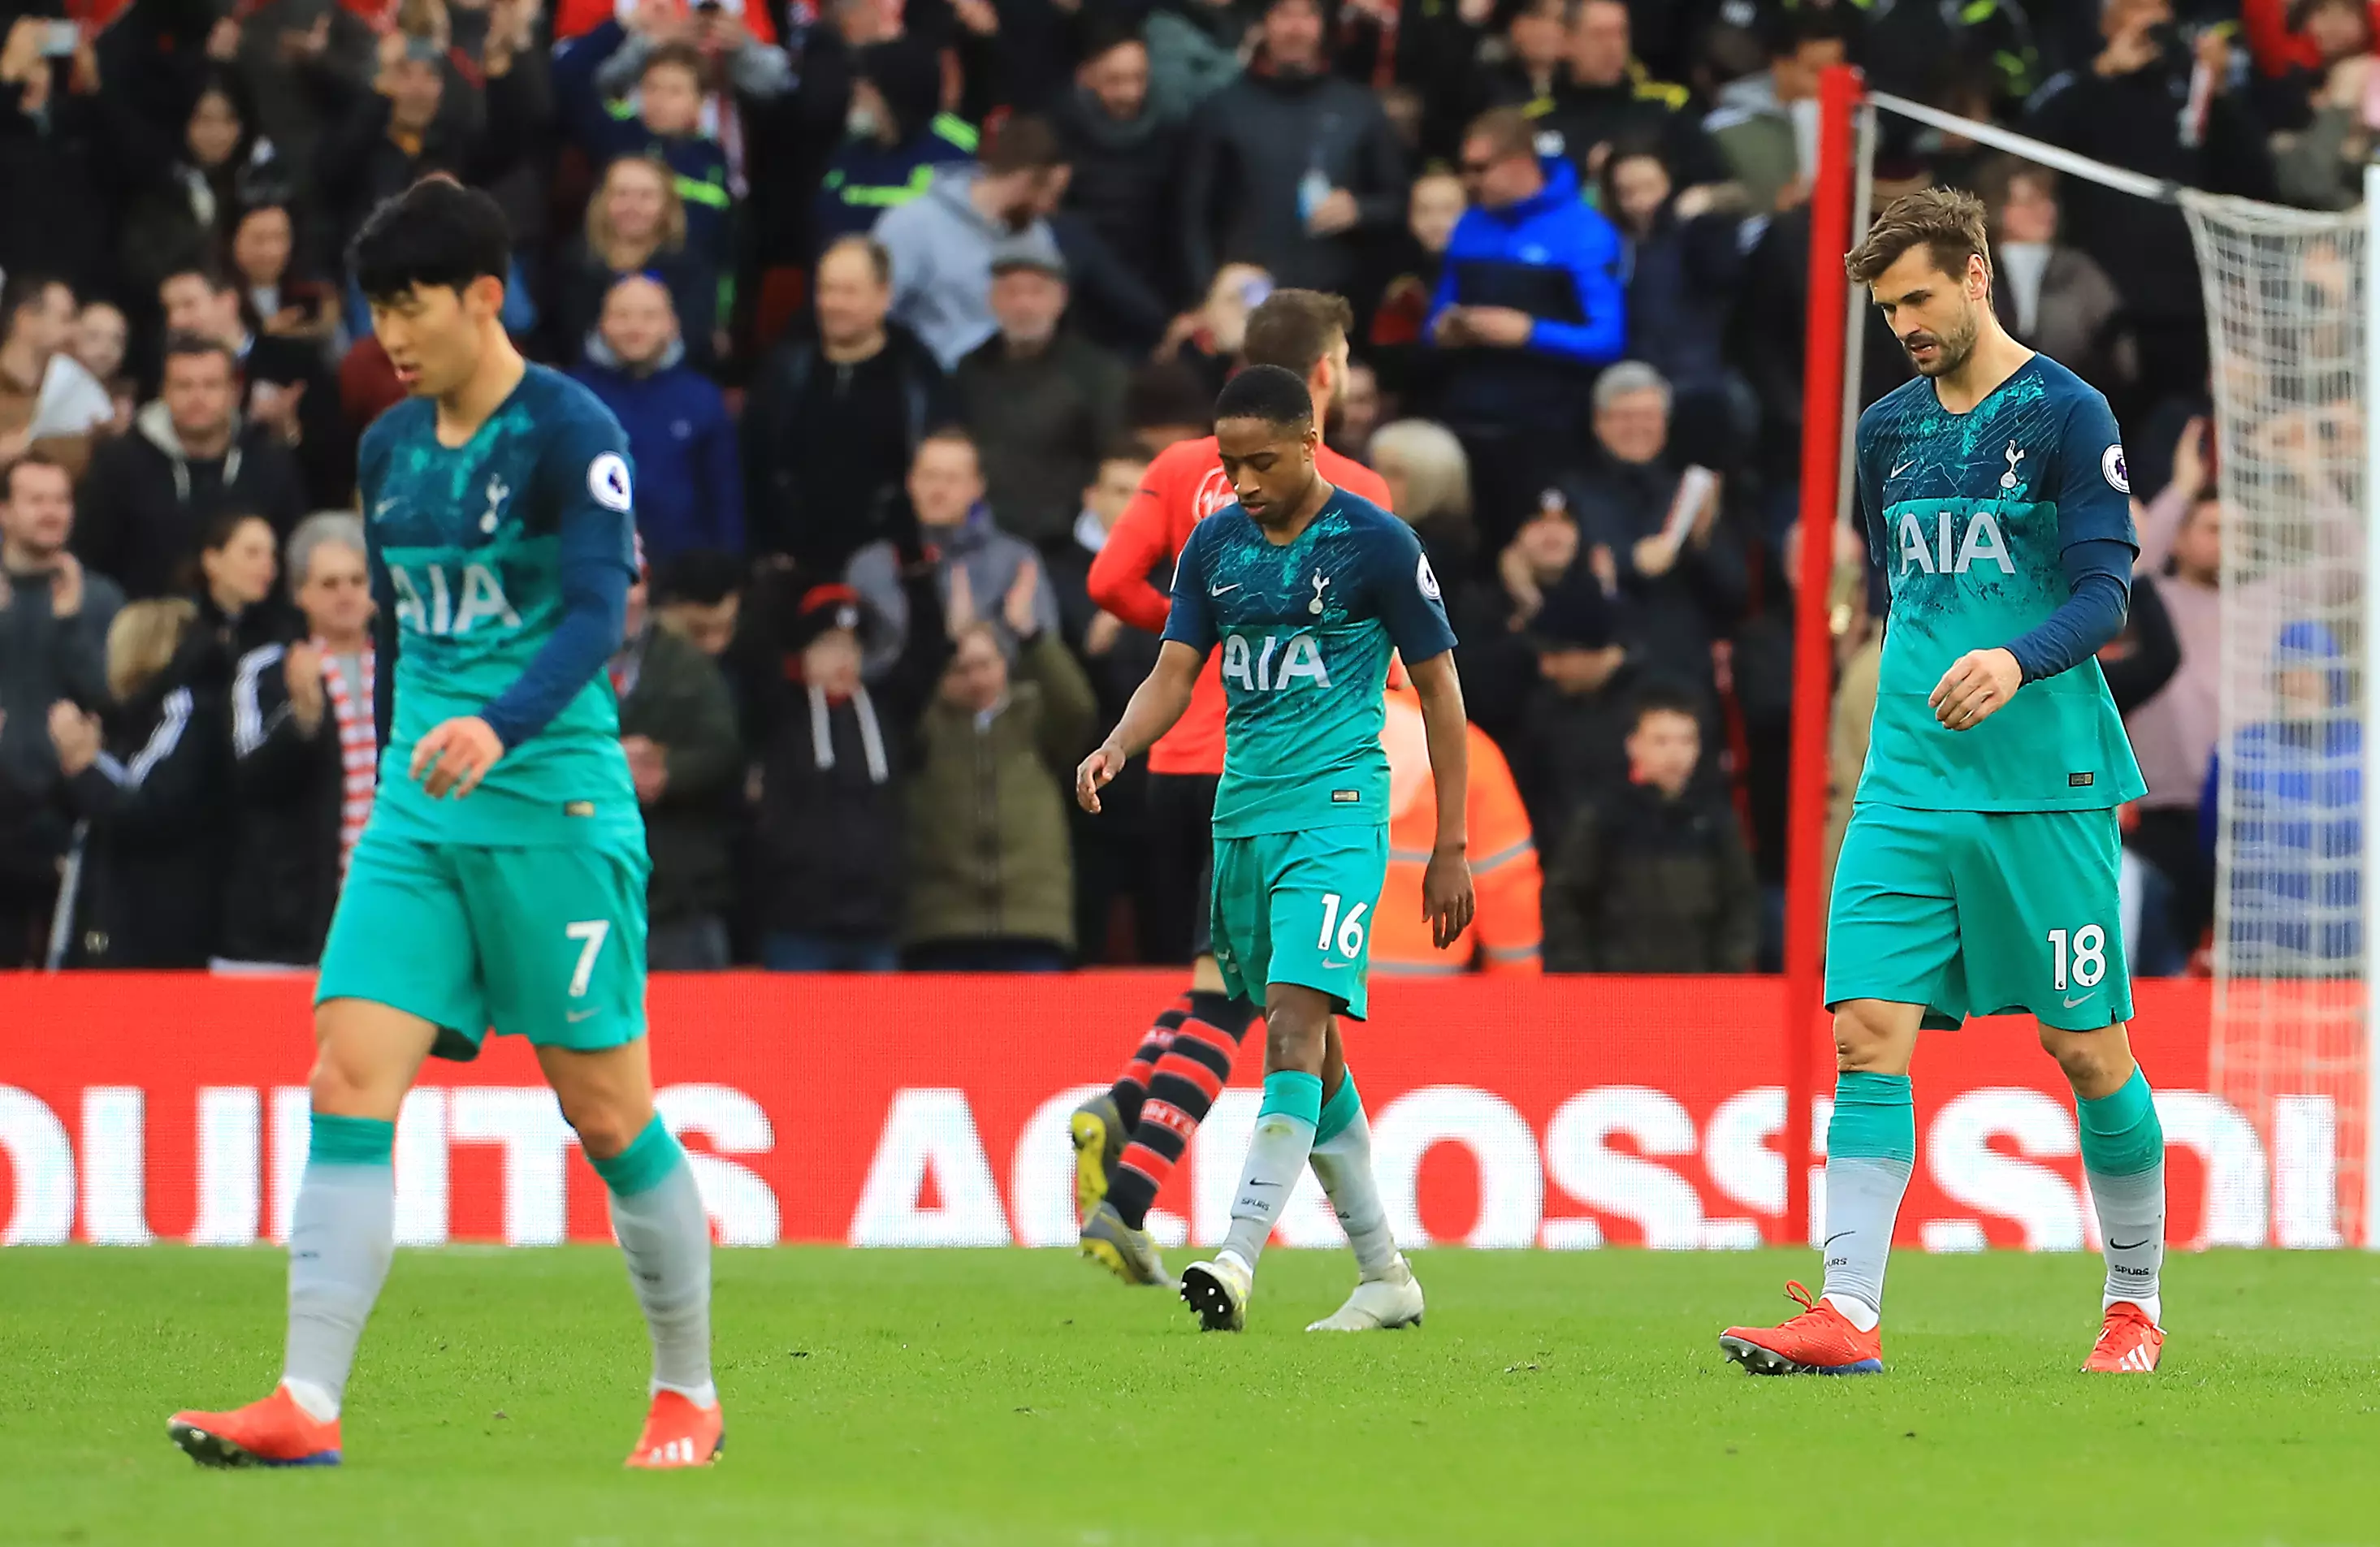 Spurs players dejected after their loss to Southampton. Image: PA Images